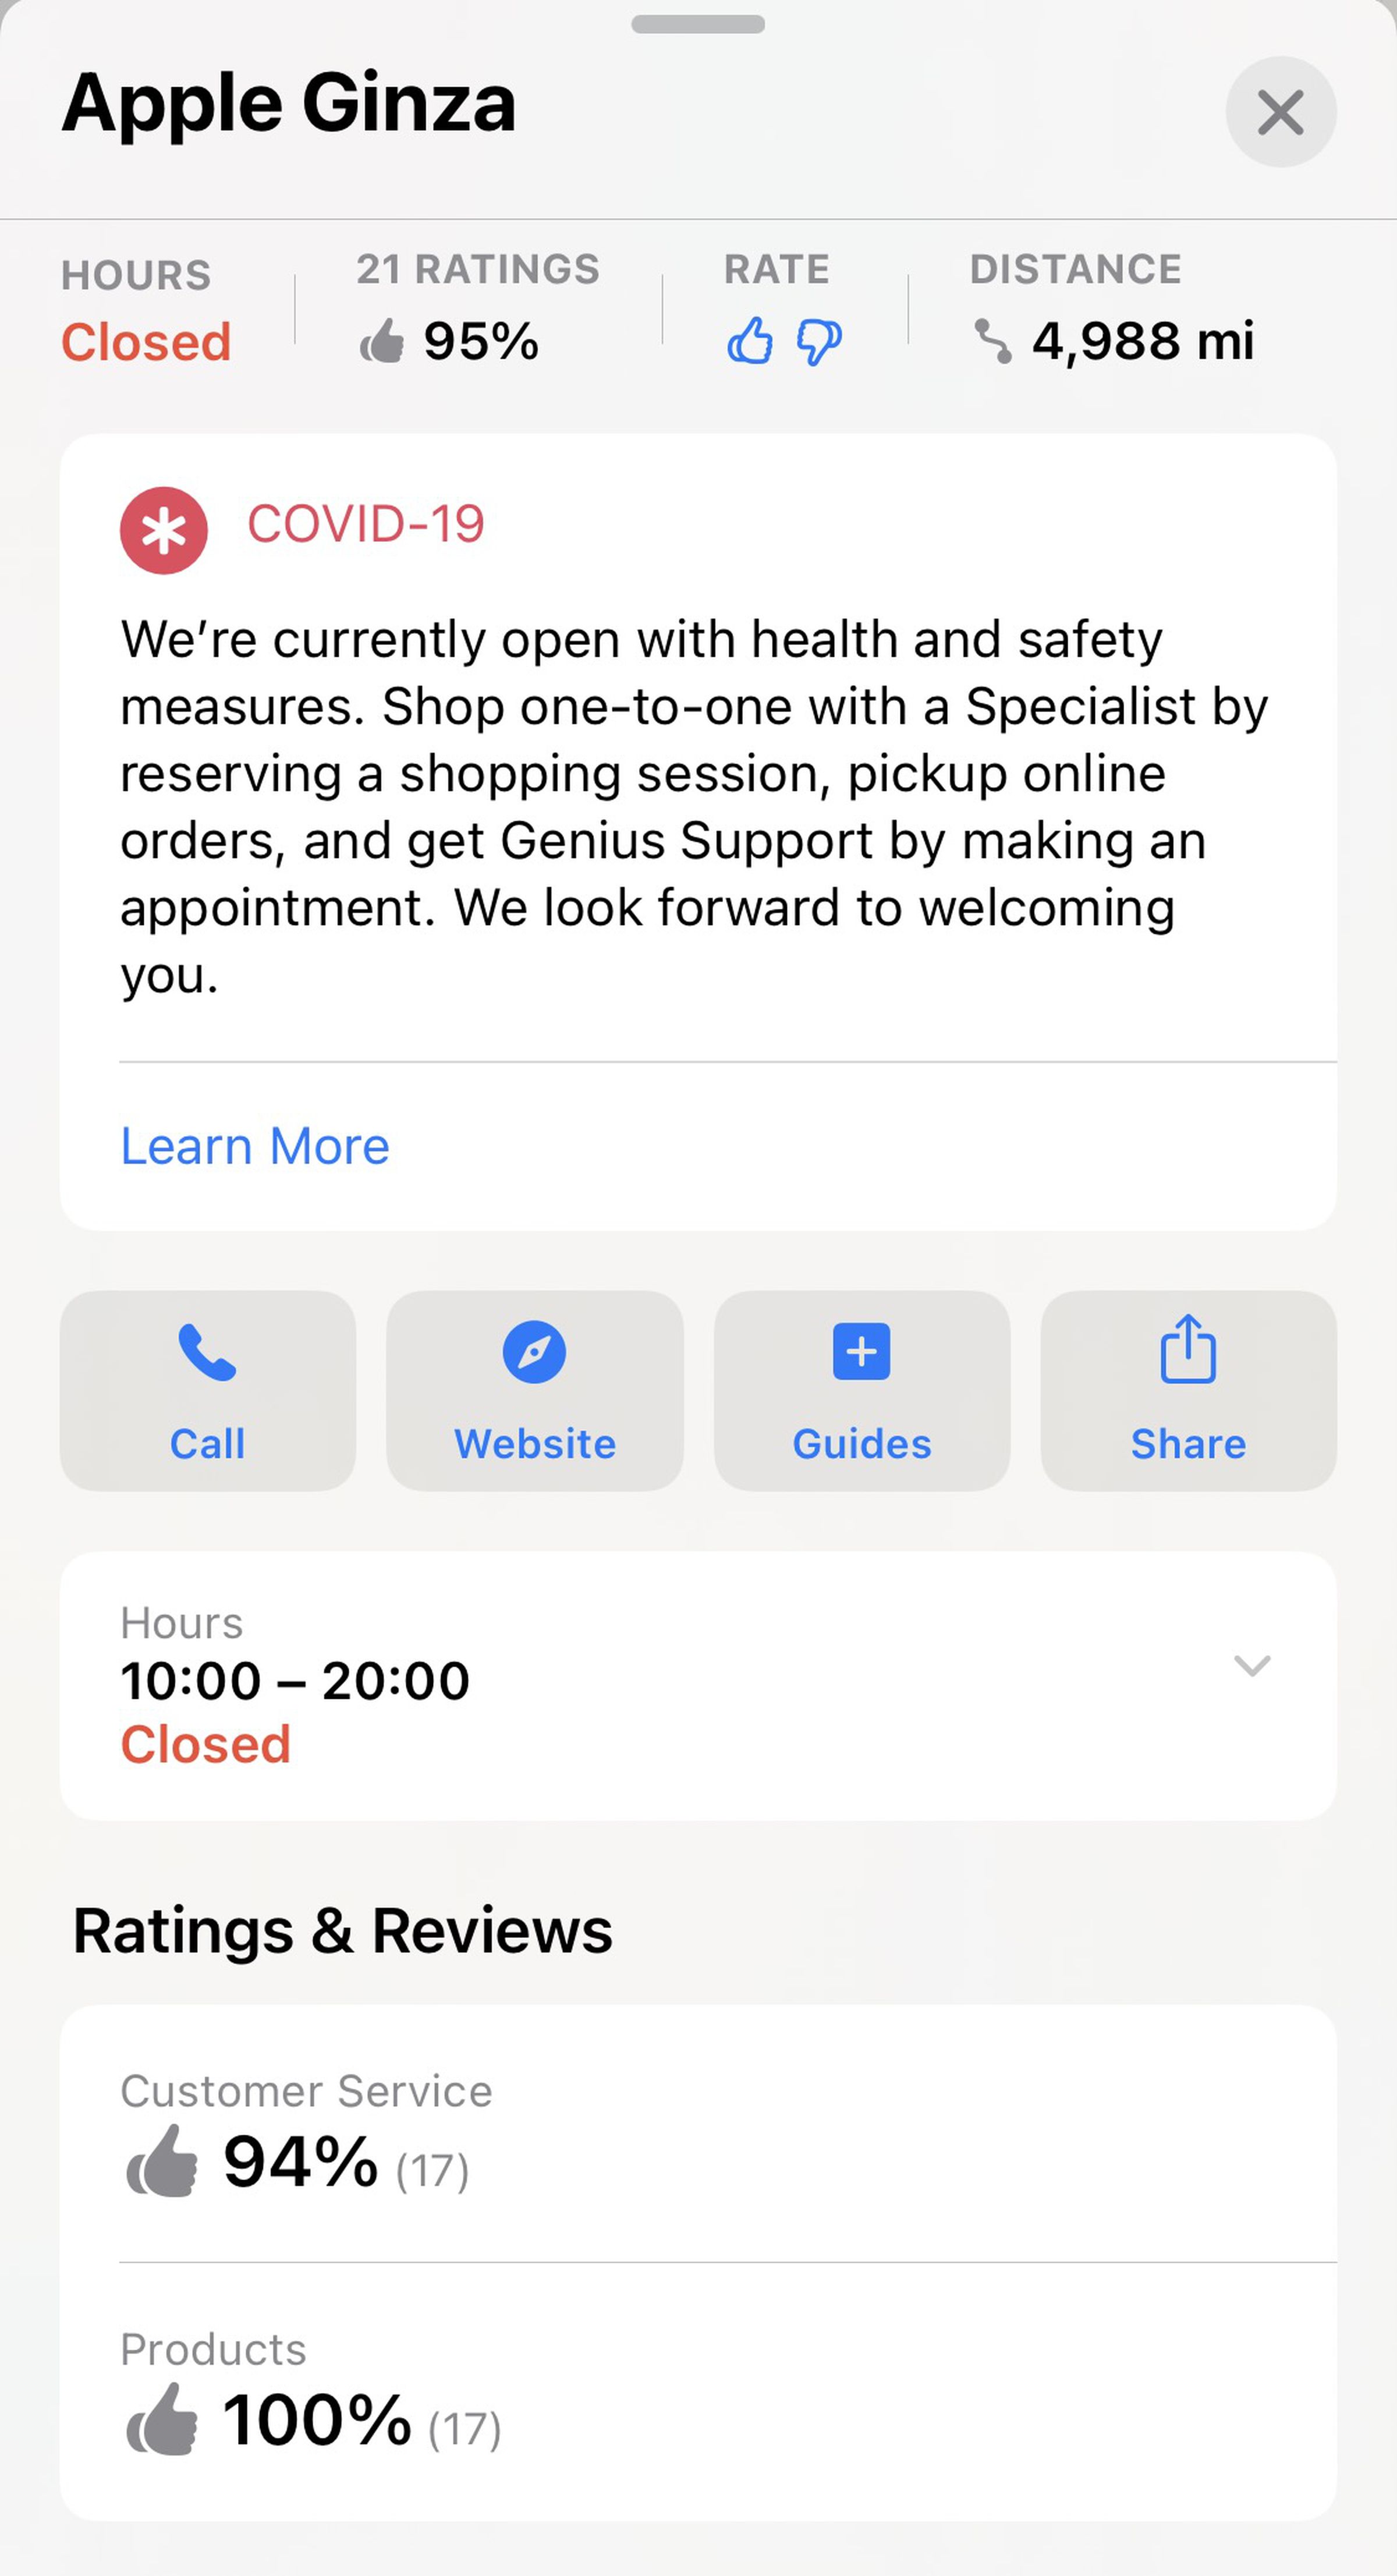 Image showing the product card for Apple’s Ginza store. Included is a label saying 21 ratings, with a thumbs up icon and a label that reads 95 percent. There’s also thumbs up / thumbs down buttons, and breakdowns for customer service and products ratings, both with a thumbs up icon and percentage label.